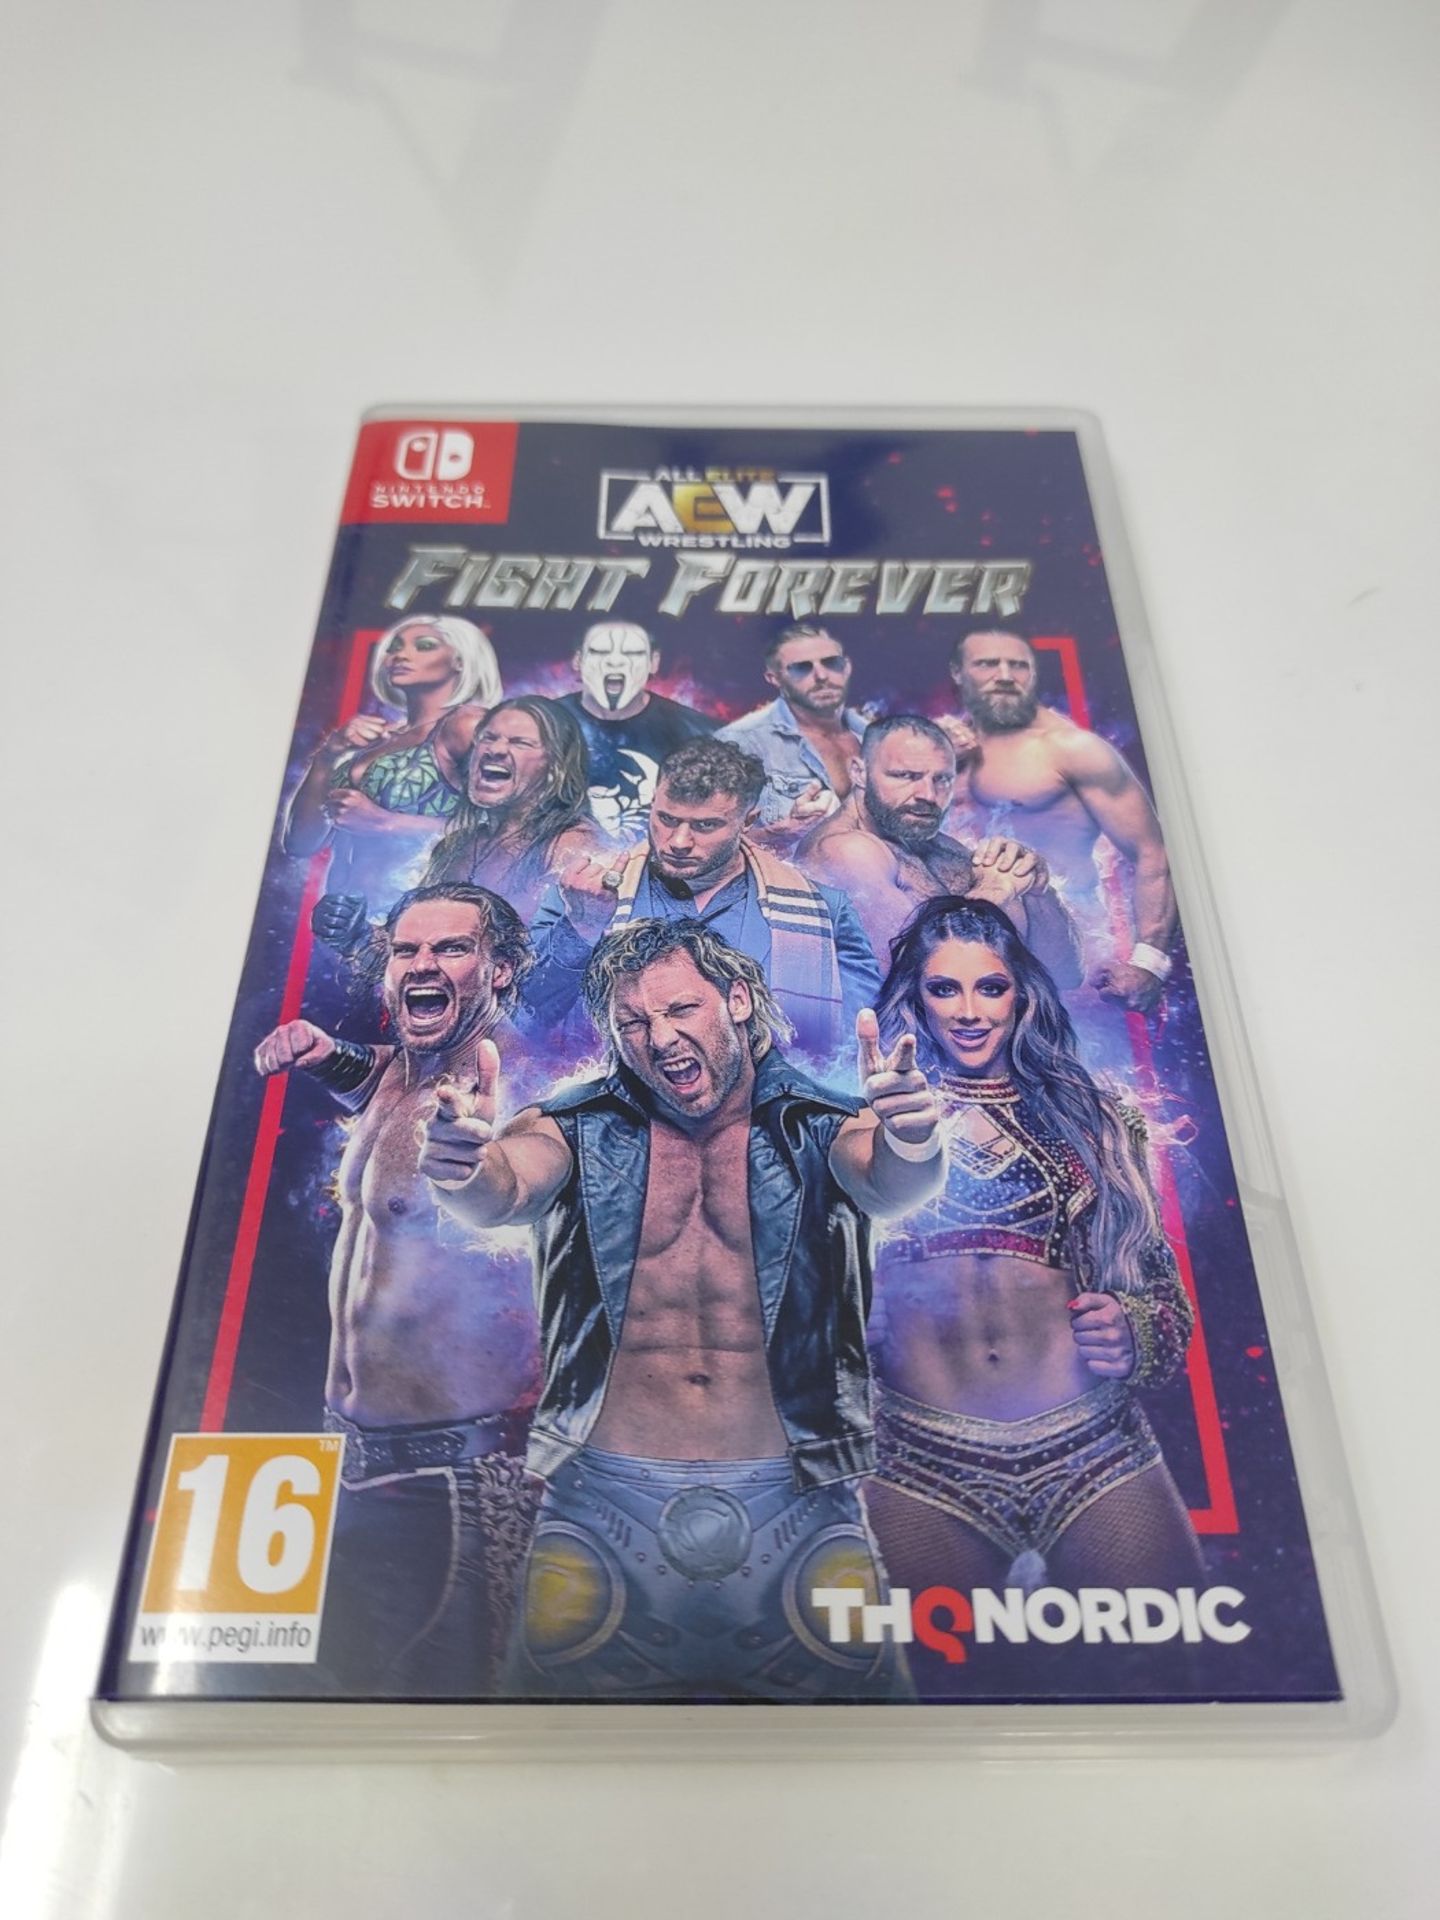 AEW: Fight Forever is a video game available on the Nintendo Switch platform. - Image 2 of 6